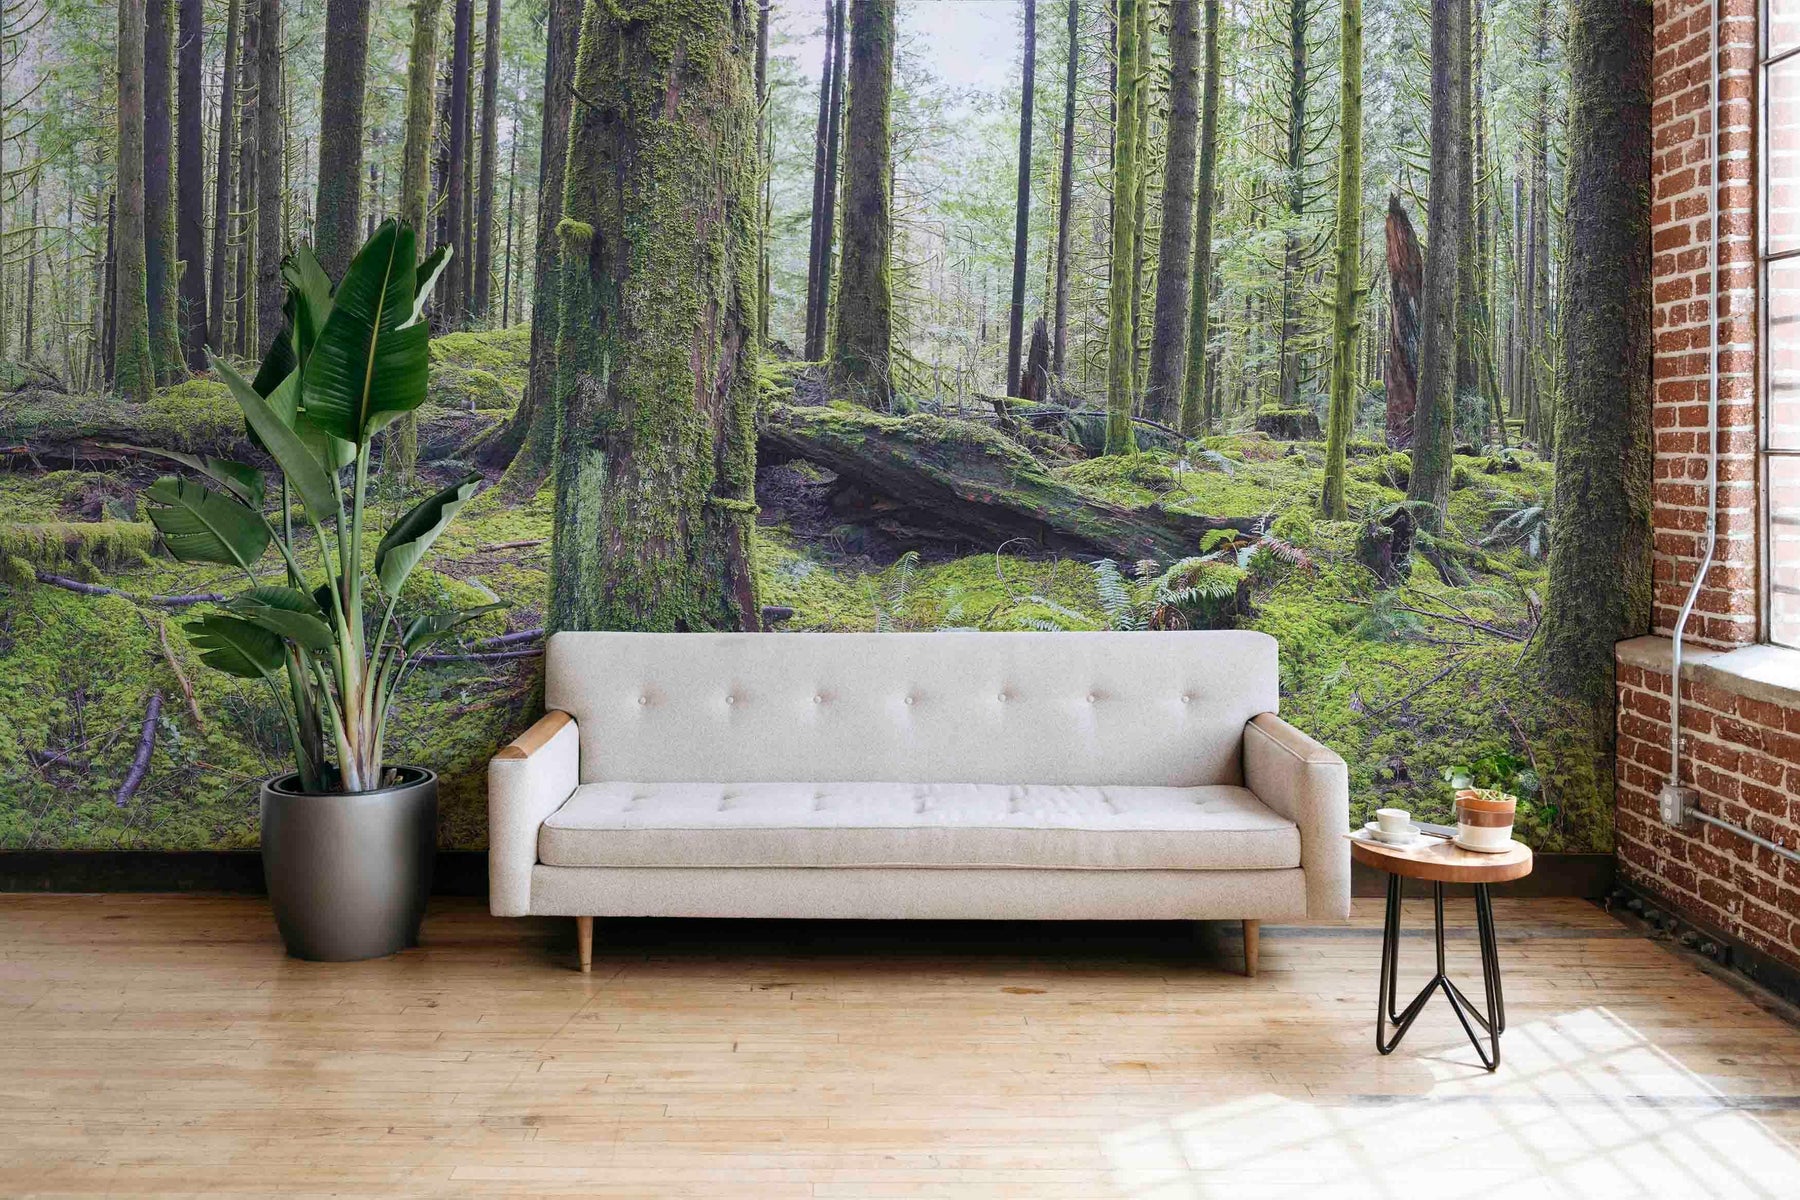 Fightal  foggy green forest wallpaper living room extra large nature  landscape wall murals scenery jungle bedroom mural woodland trees couches  art decor paintings  151x105Its not peel and stick  